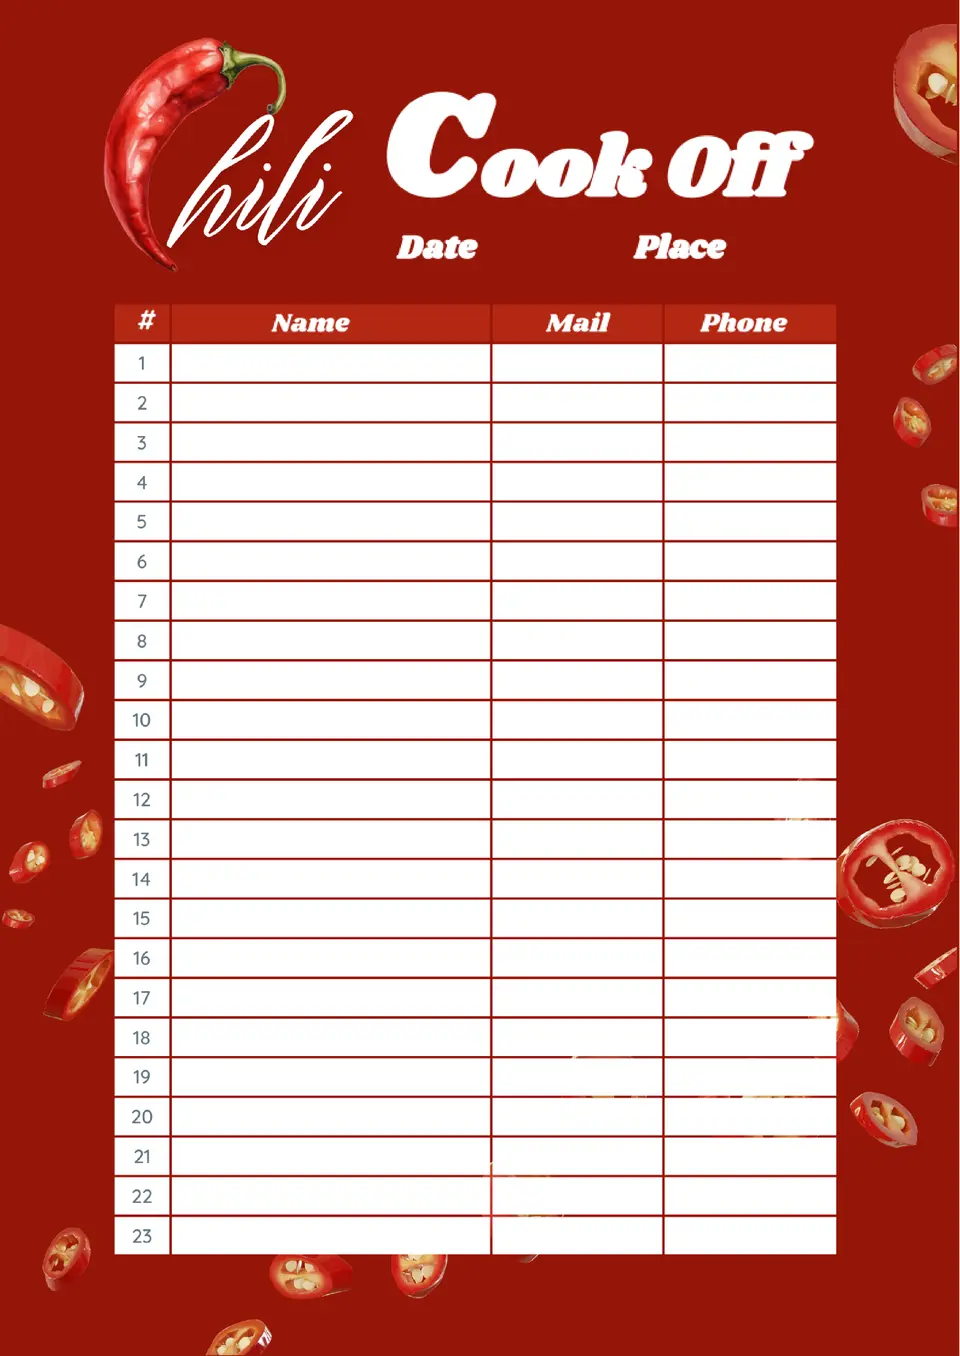 Chili Cook Off Sign Up Sheet Template